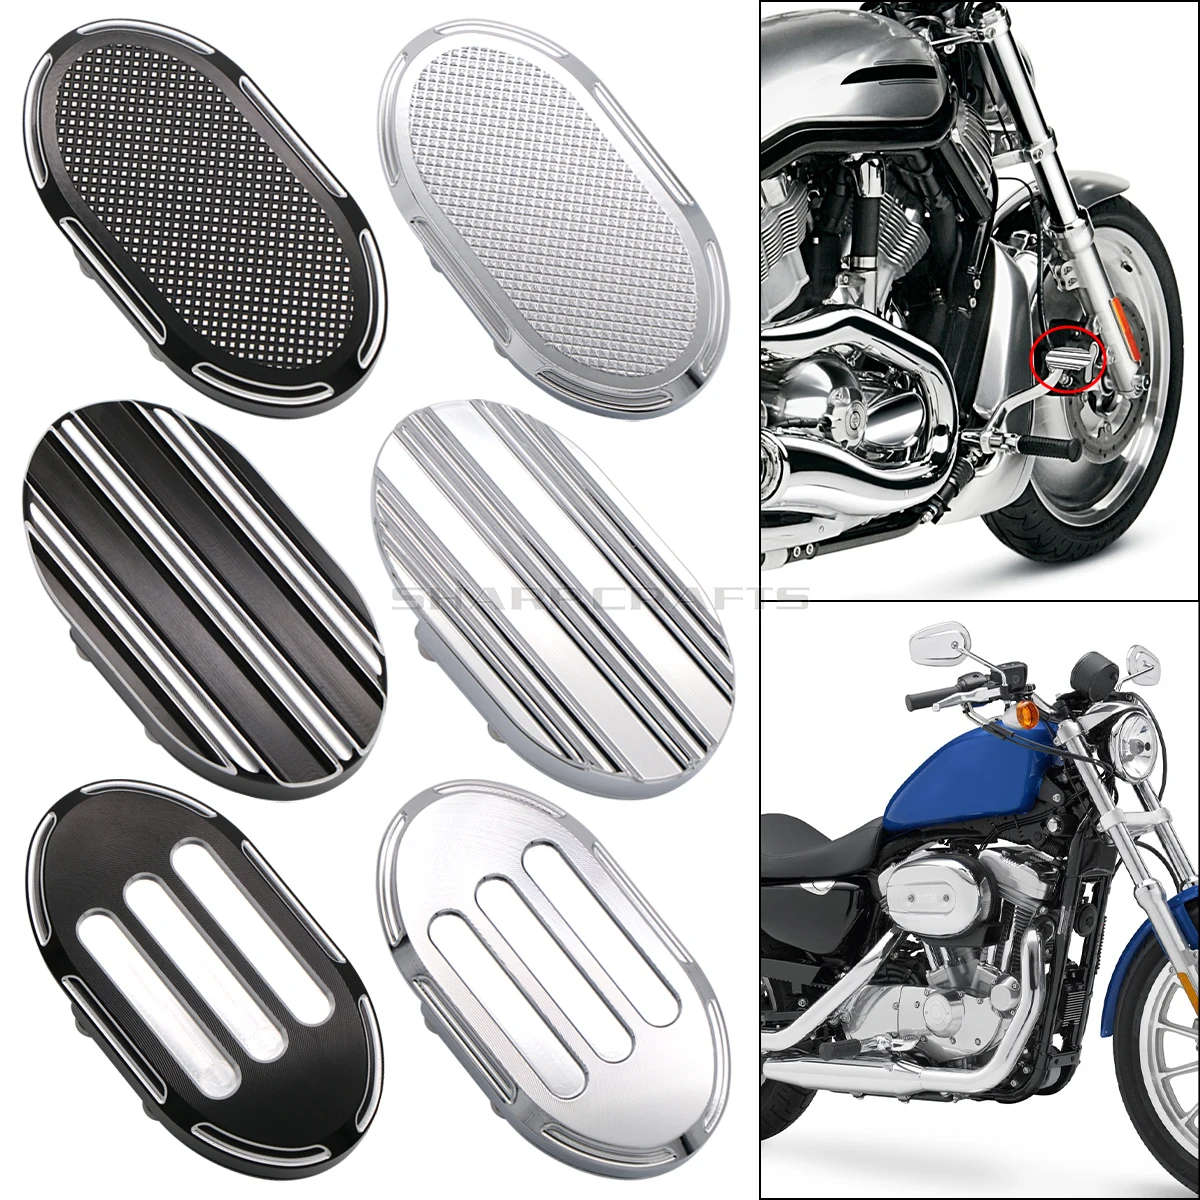 Motorcycle CNC Brake Pedal Pad Cover Footpegs For Harley Sportster XL 88... - $23.94+